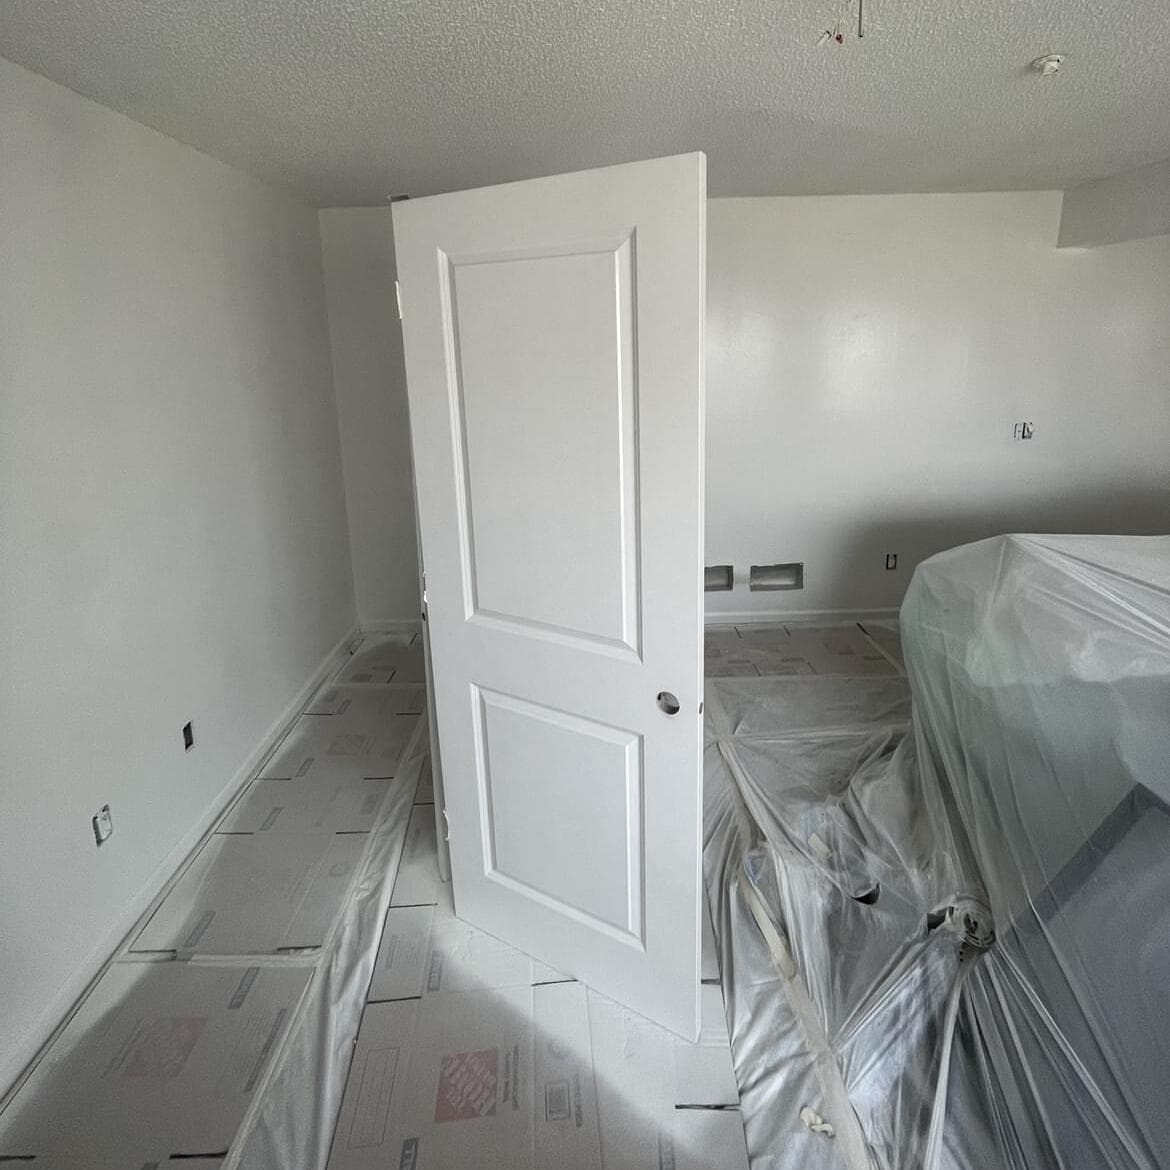 Interior and Exterior commercial and residential painting, all types. Plus Drywall repair. In business since 2017.